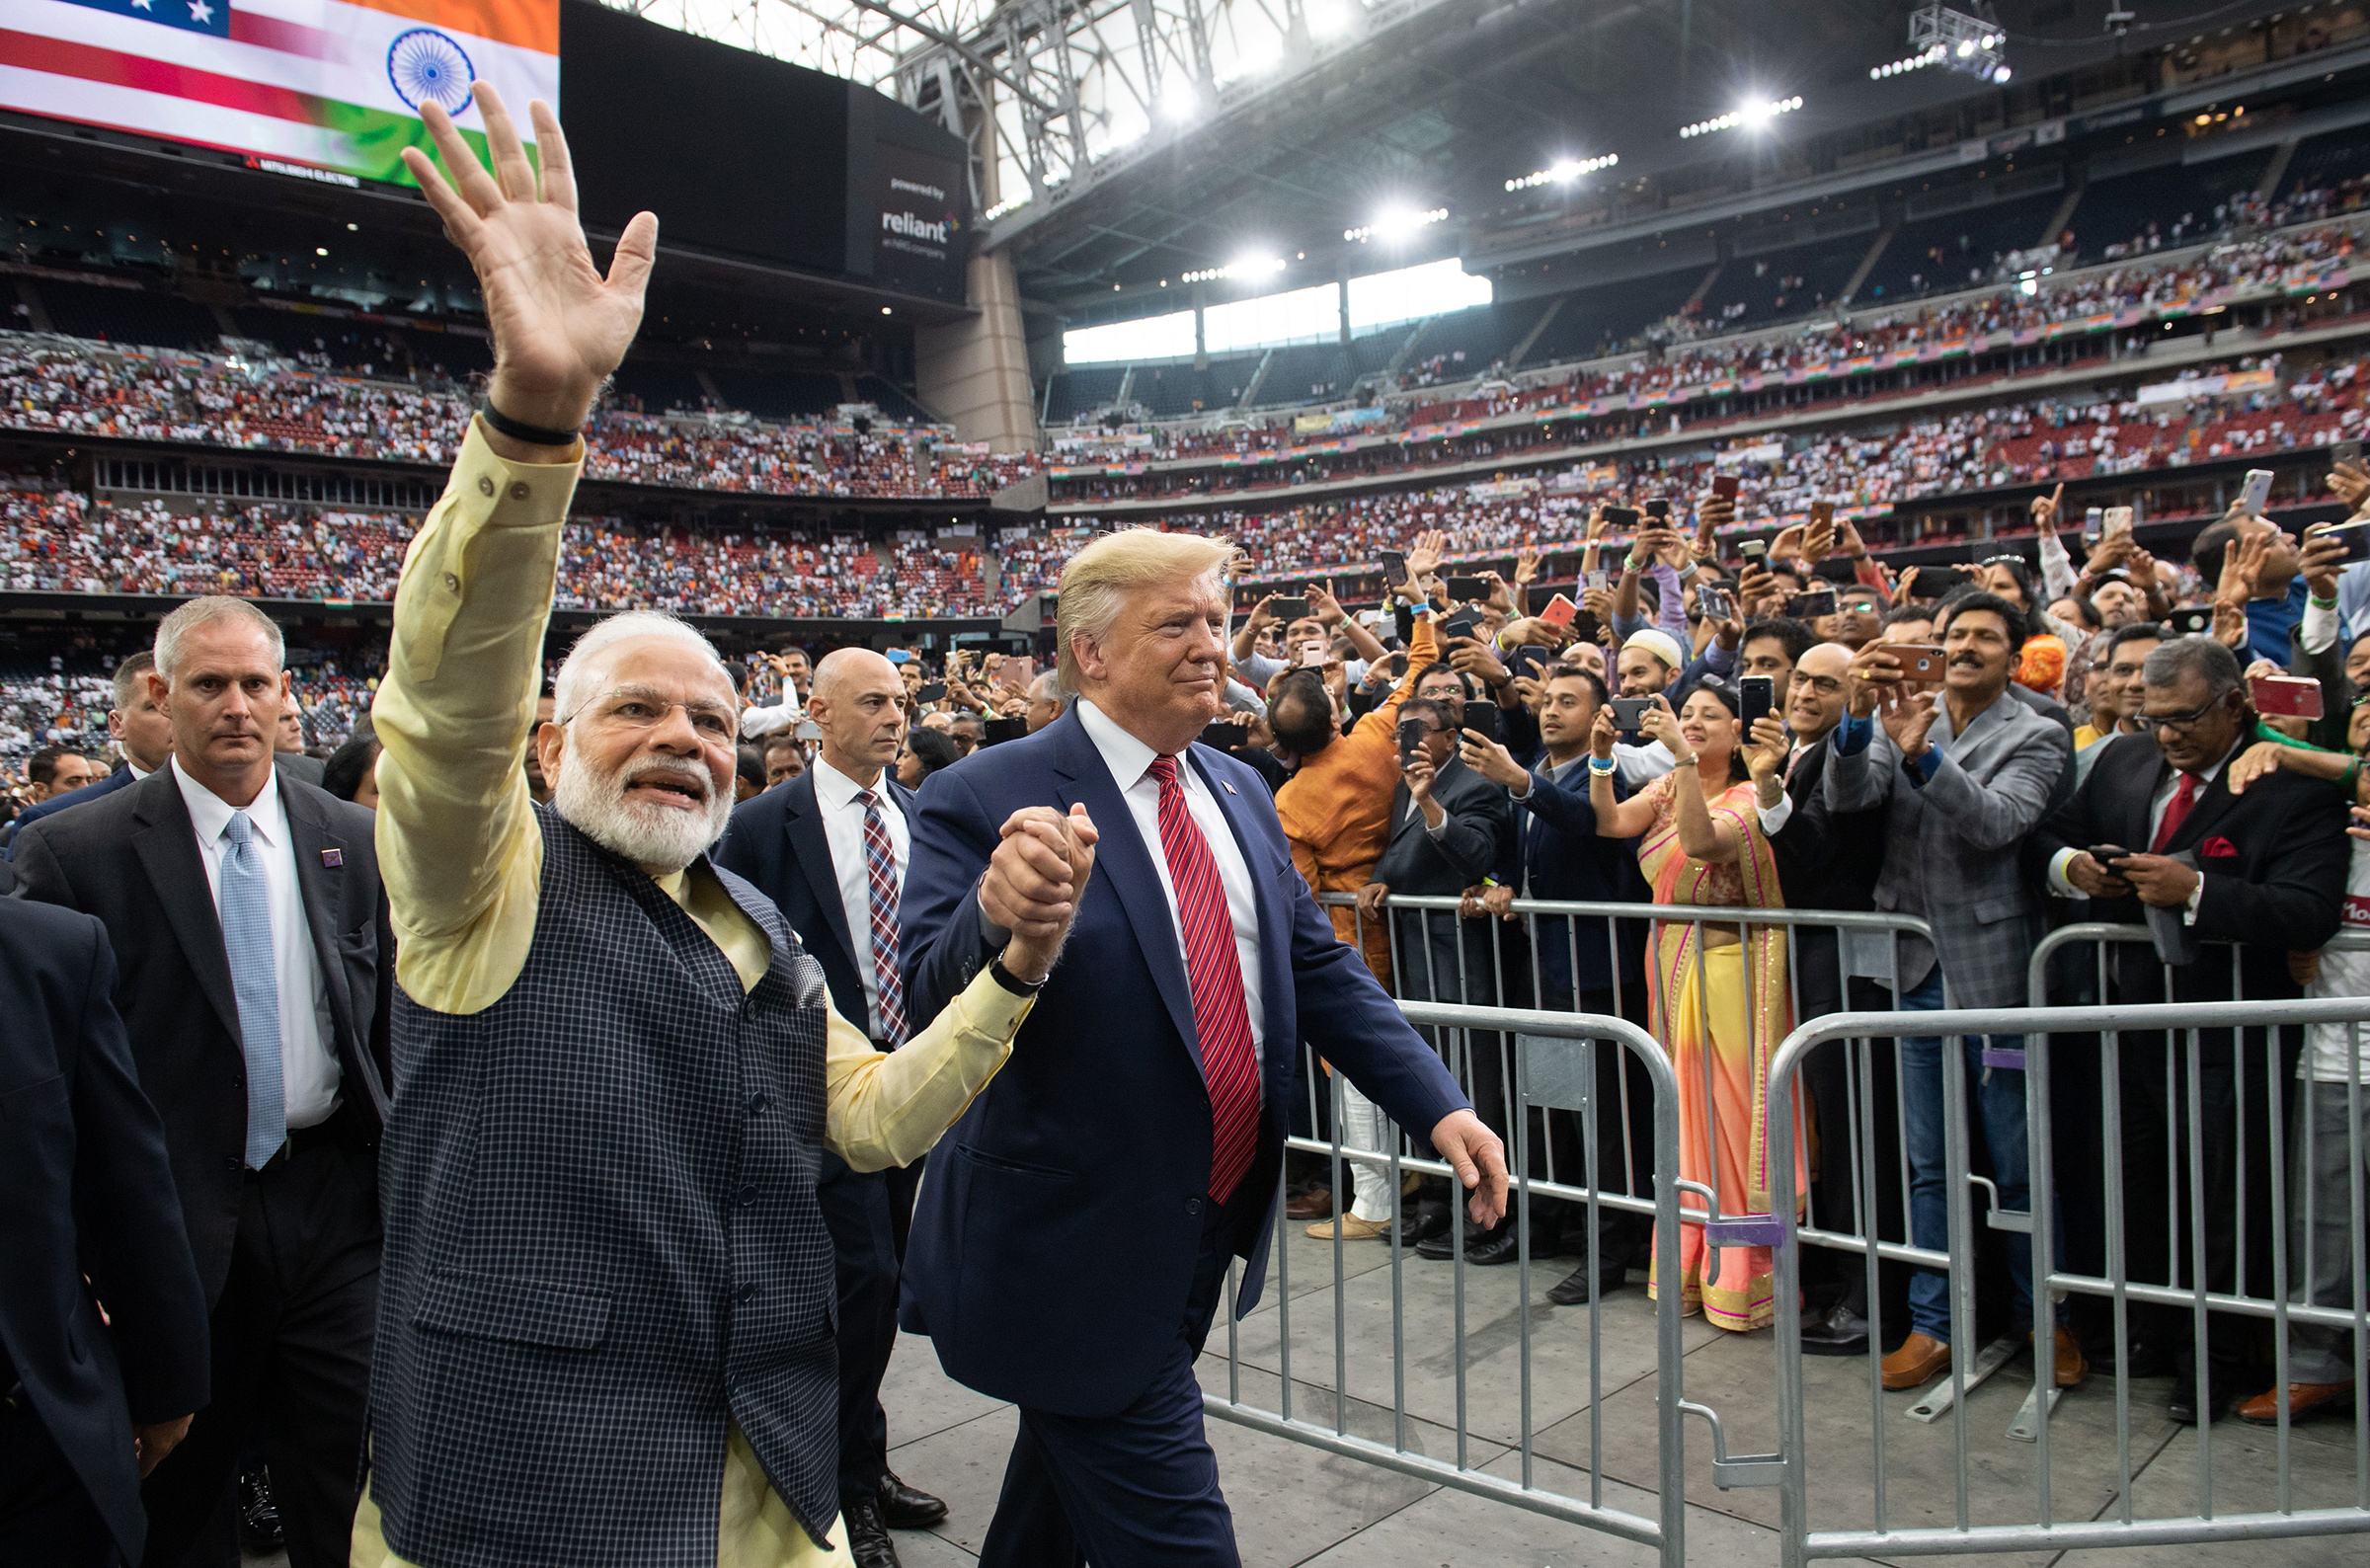 Trump and Modi attend "Howdy, Modi!" at NRG Stadium in Houston on Sept. 22, 2019. Tens of thousands of Indian-Americans converged for an unusual joint rally, a symbol of the bond between the two leaders. (Saul Loeb—AFP/Getty Images)